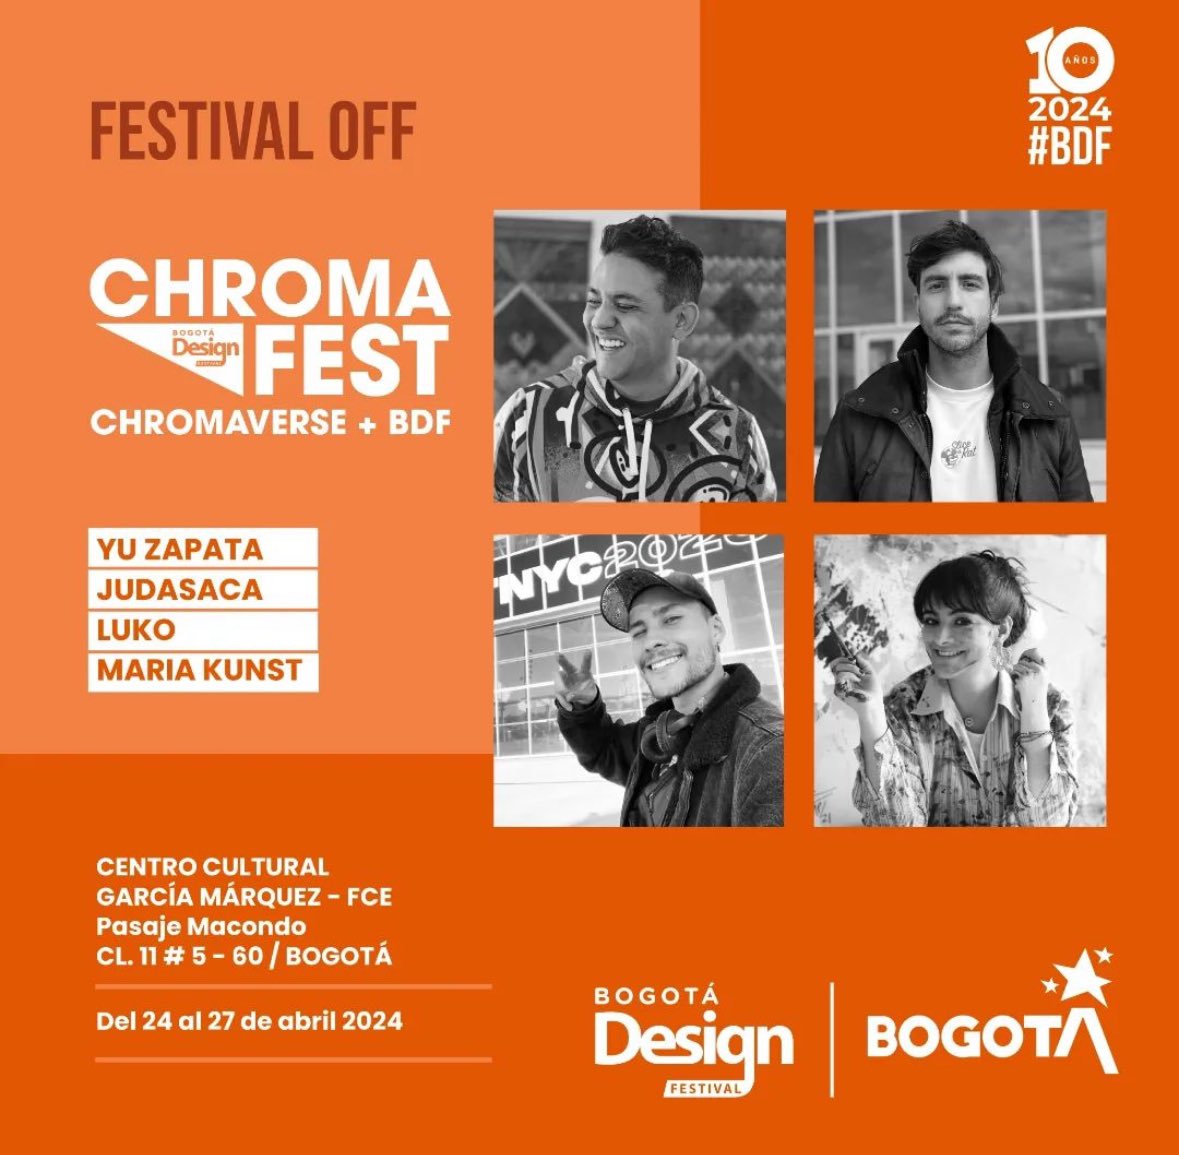 ChromaVerse is back! We got together with the Bogotá Design Festival to create ChromaFest! Starting this next April 24th Let’s go! @YuZapata3SC @lukoart_ @malzate_kunst @judasaca_art